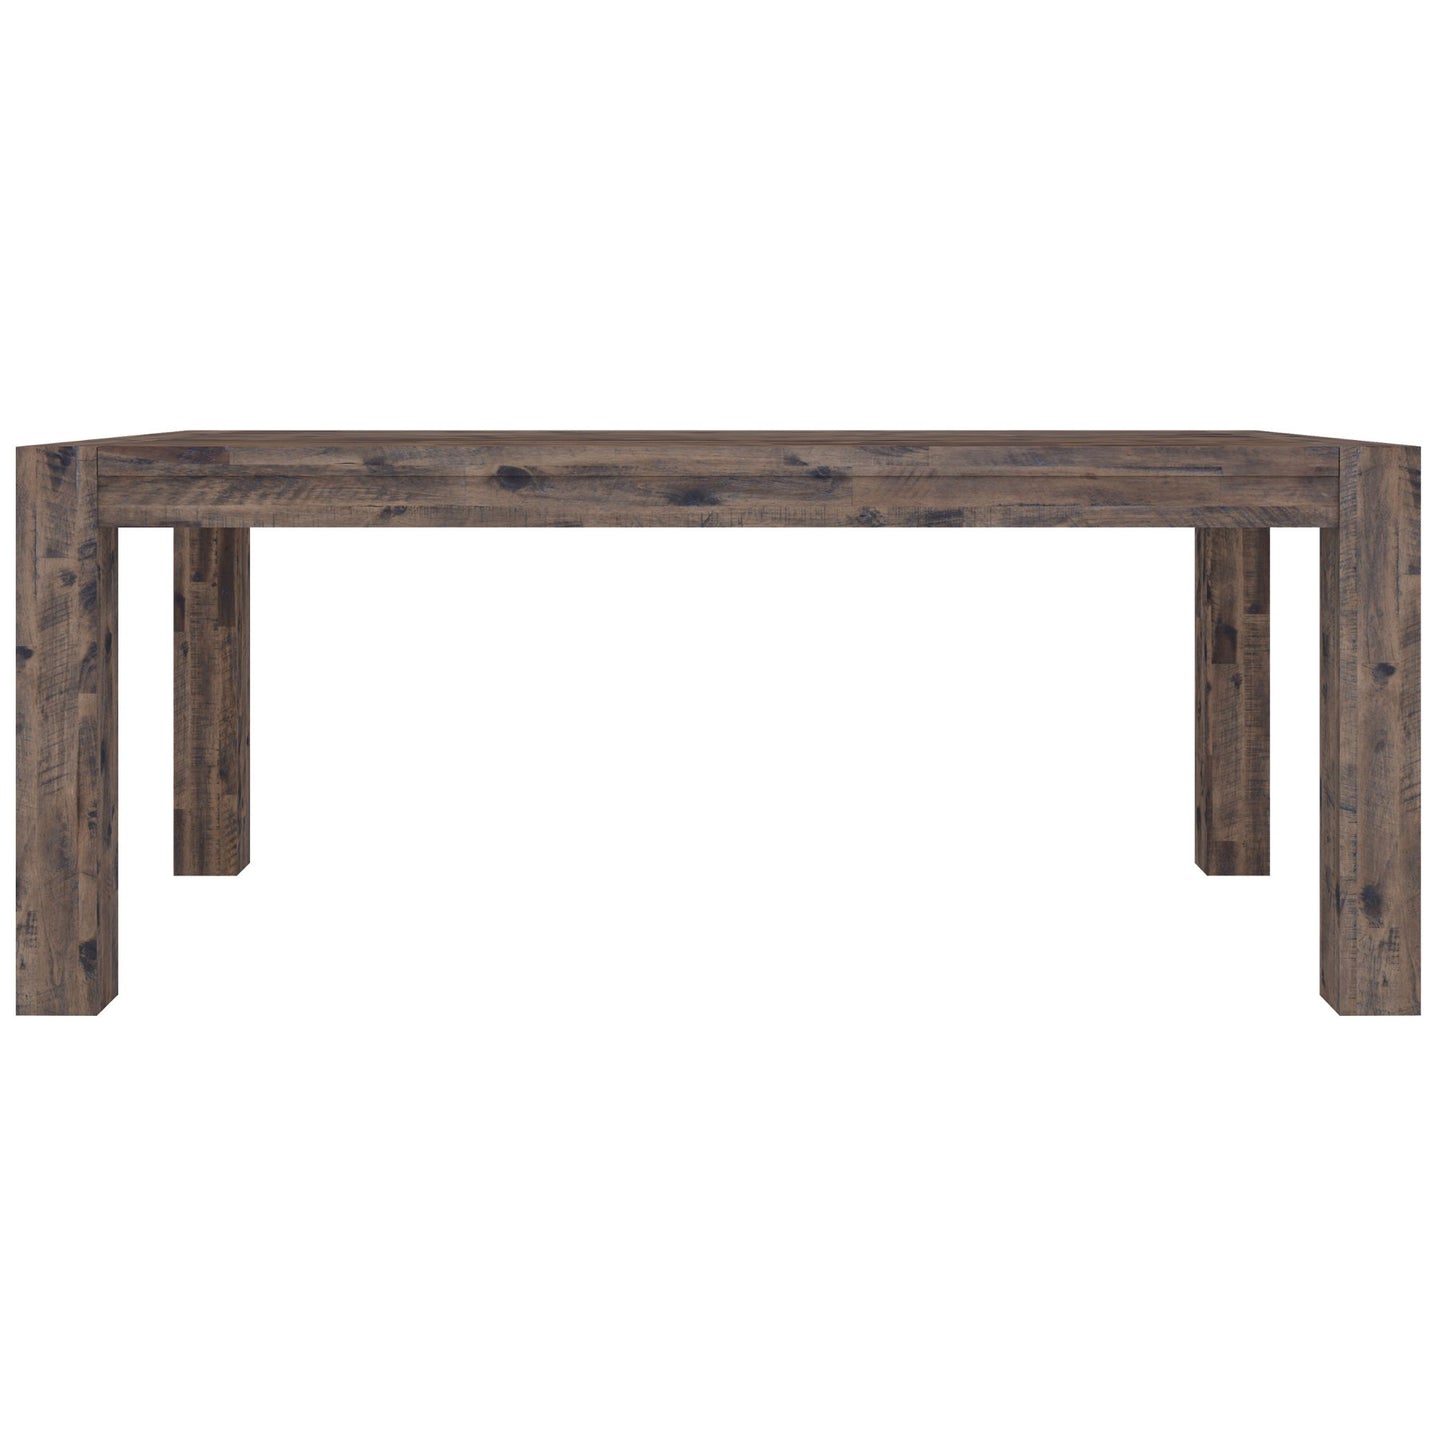 Solid Acacia Timber Wood Dining Table 210cm  - Stone Grey